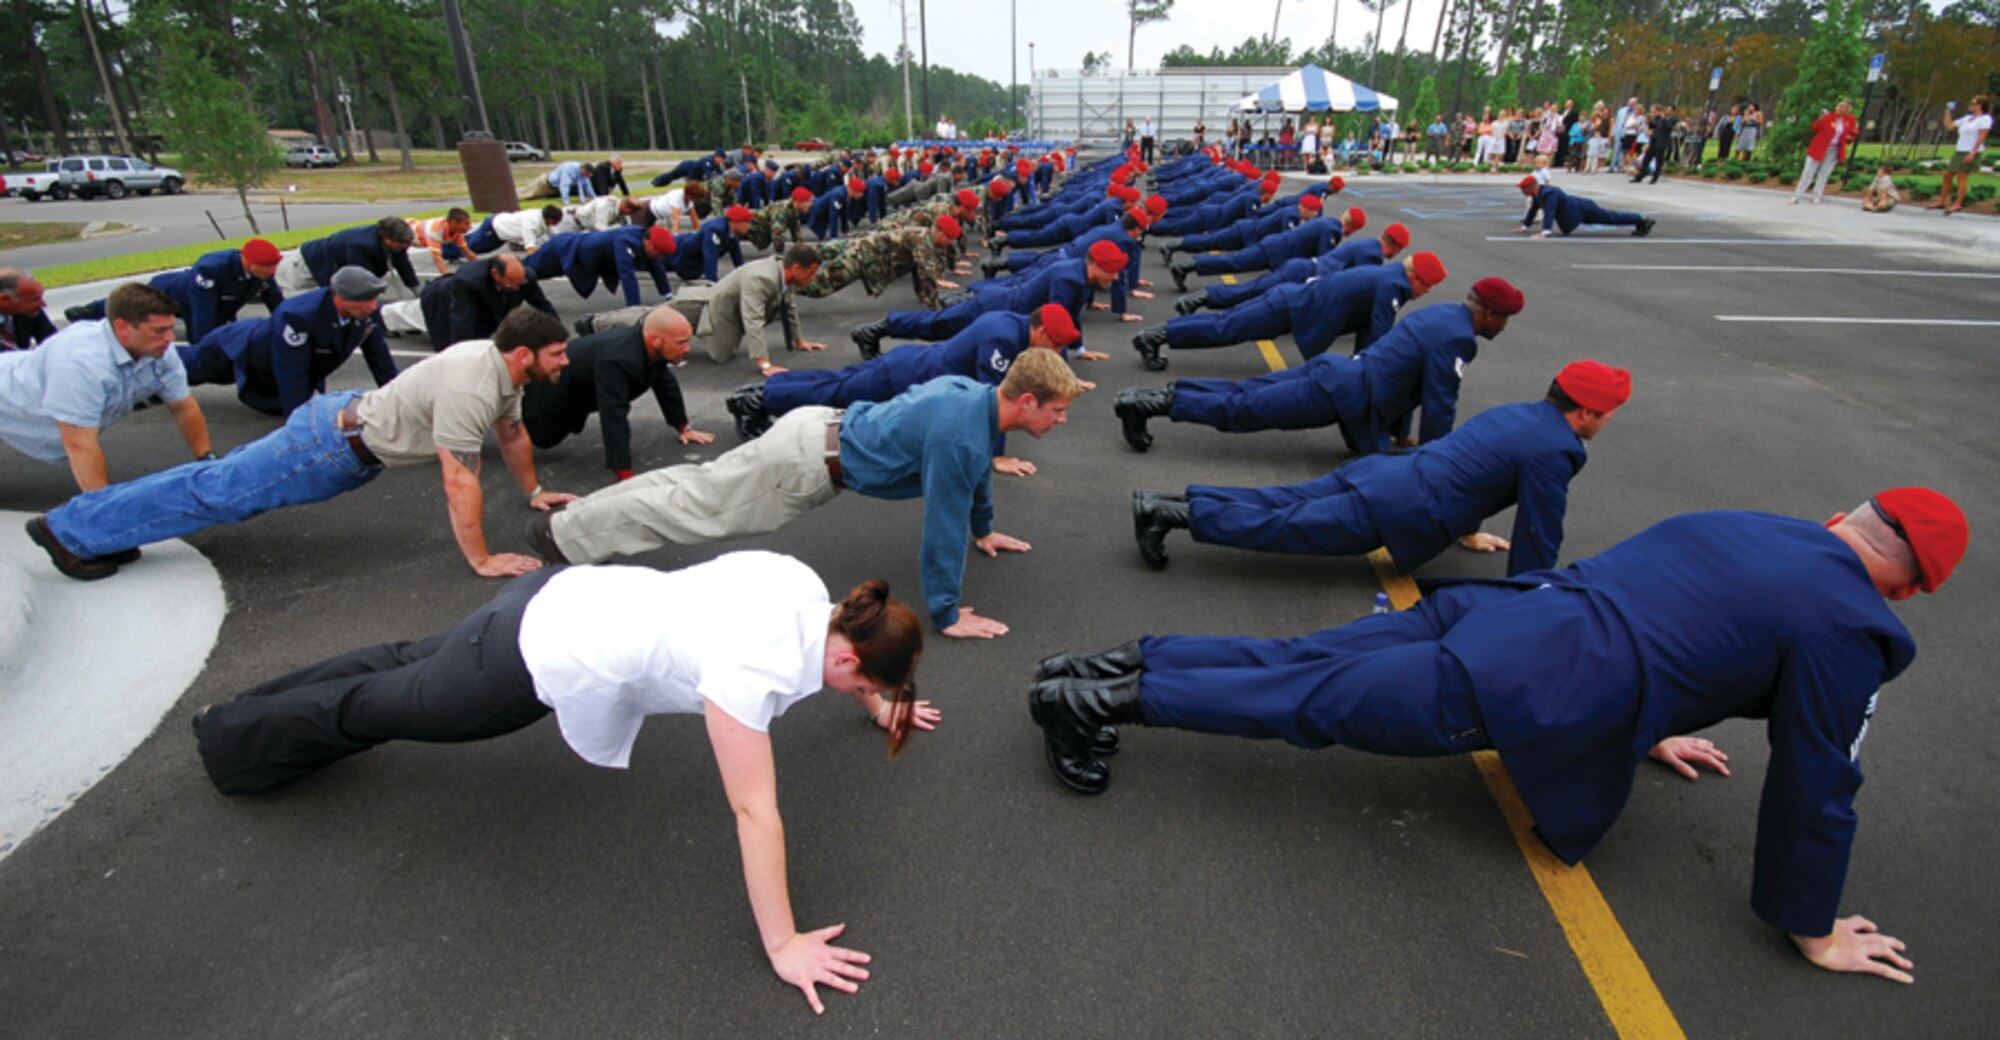 Special tactics Airmen and family members of fallen special tactics warriors join in memorial pushups during the dedication of the Crate Special Tactics Advanced Skills Training Center at Hurlburt Field Wednesday. The center will provide operational training to newly-minted special tactics Airmen.  It is named for Staff Sgt. Casey Crate, a combat controller who lost his life in the crash of an Iraqi air force aircraft in 2005. (U.S. Air Force photo by Chief Master Sgt. Gary Emery)